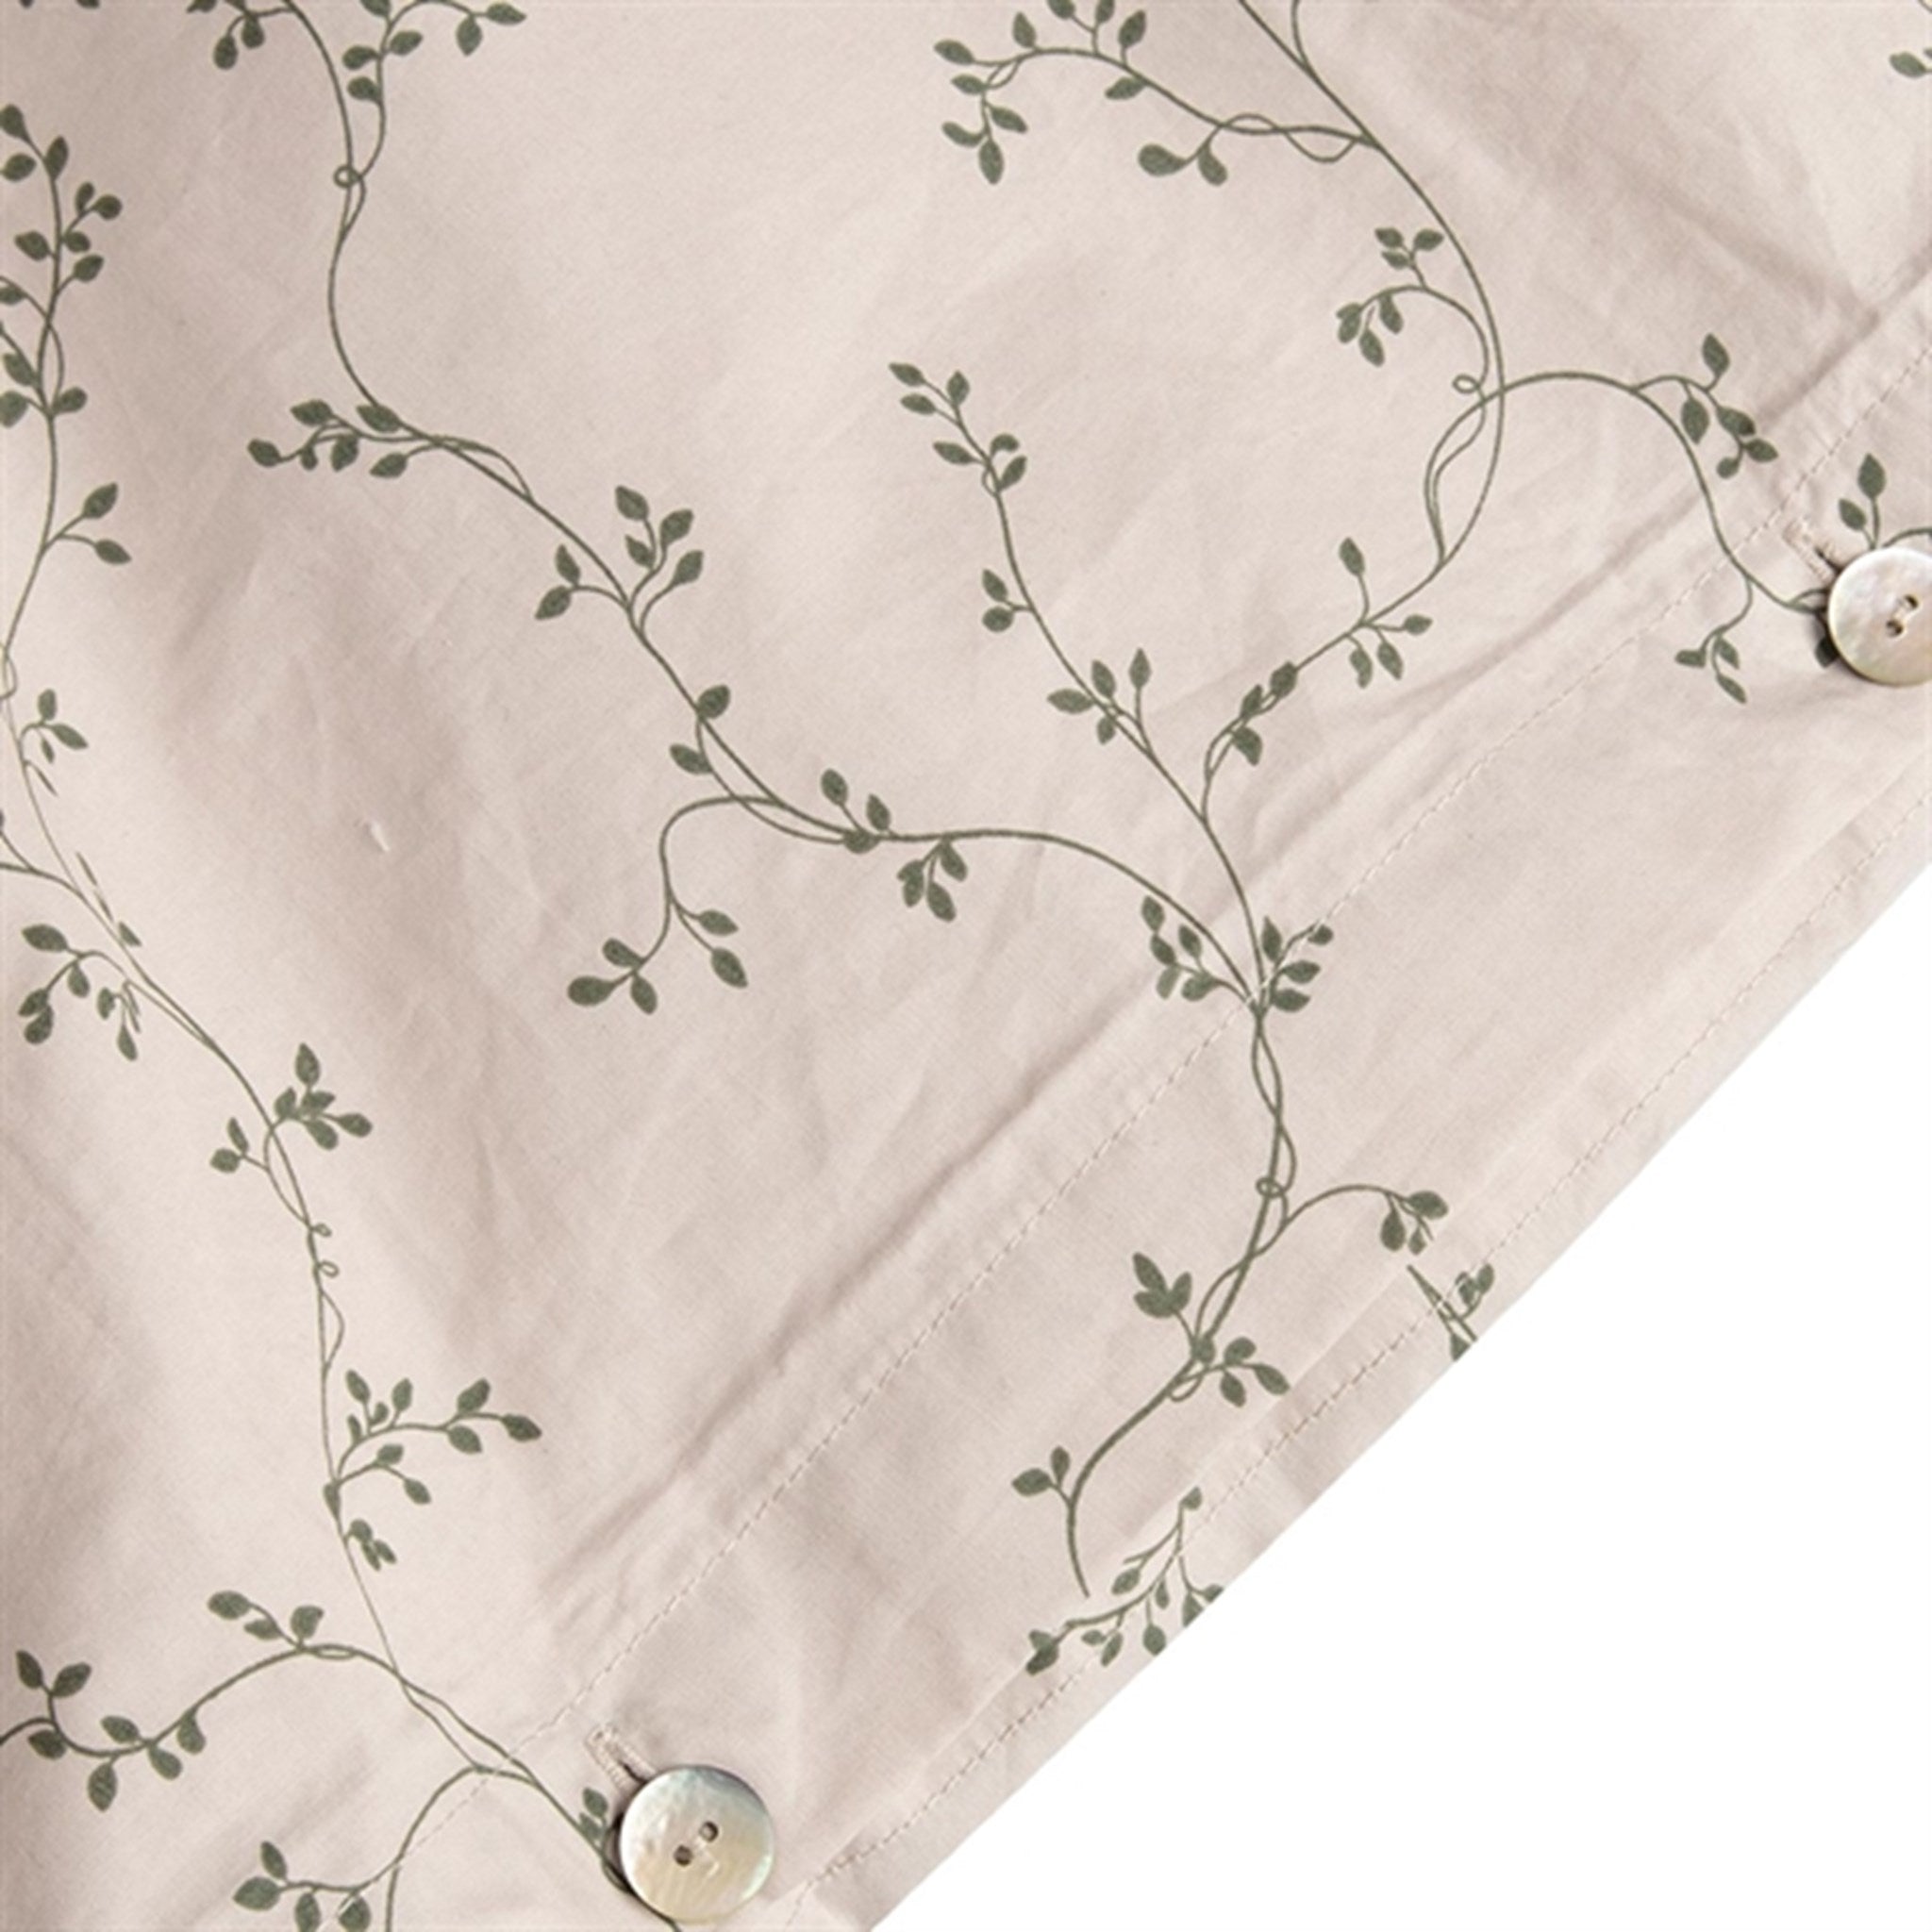 Garbo&Friends Percale Bedding Botany DK 2